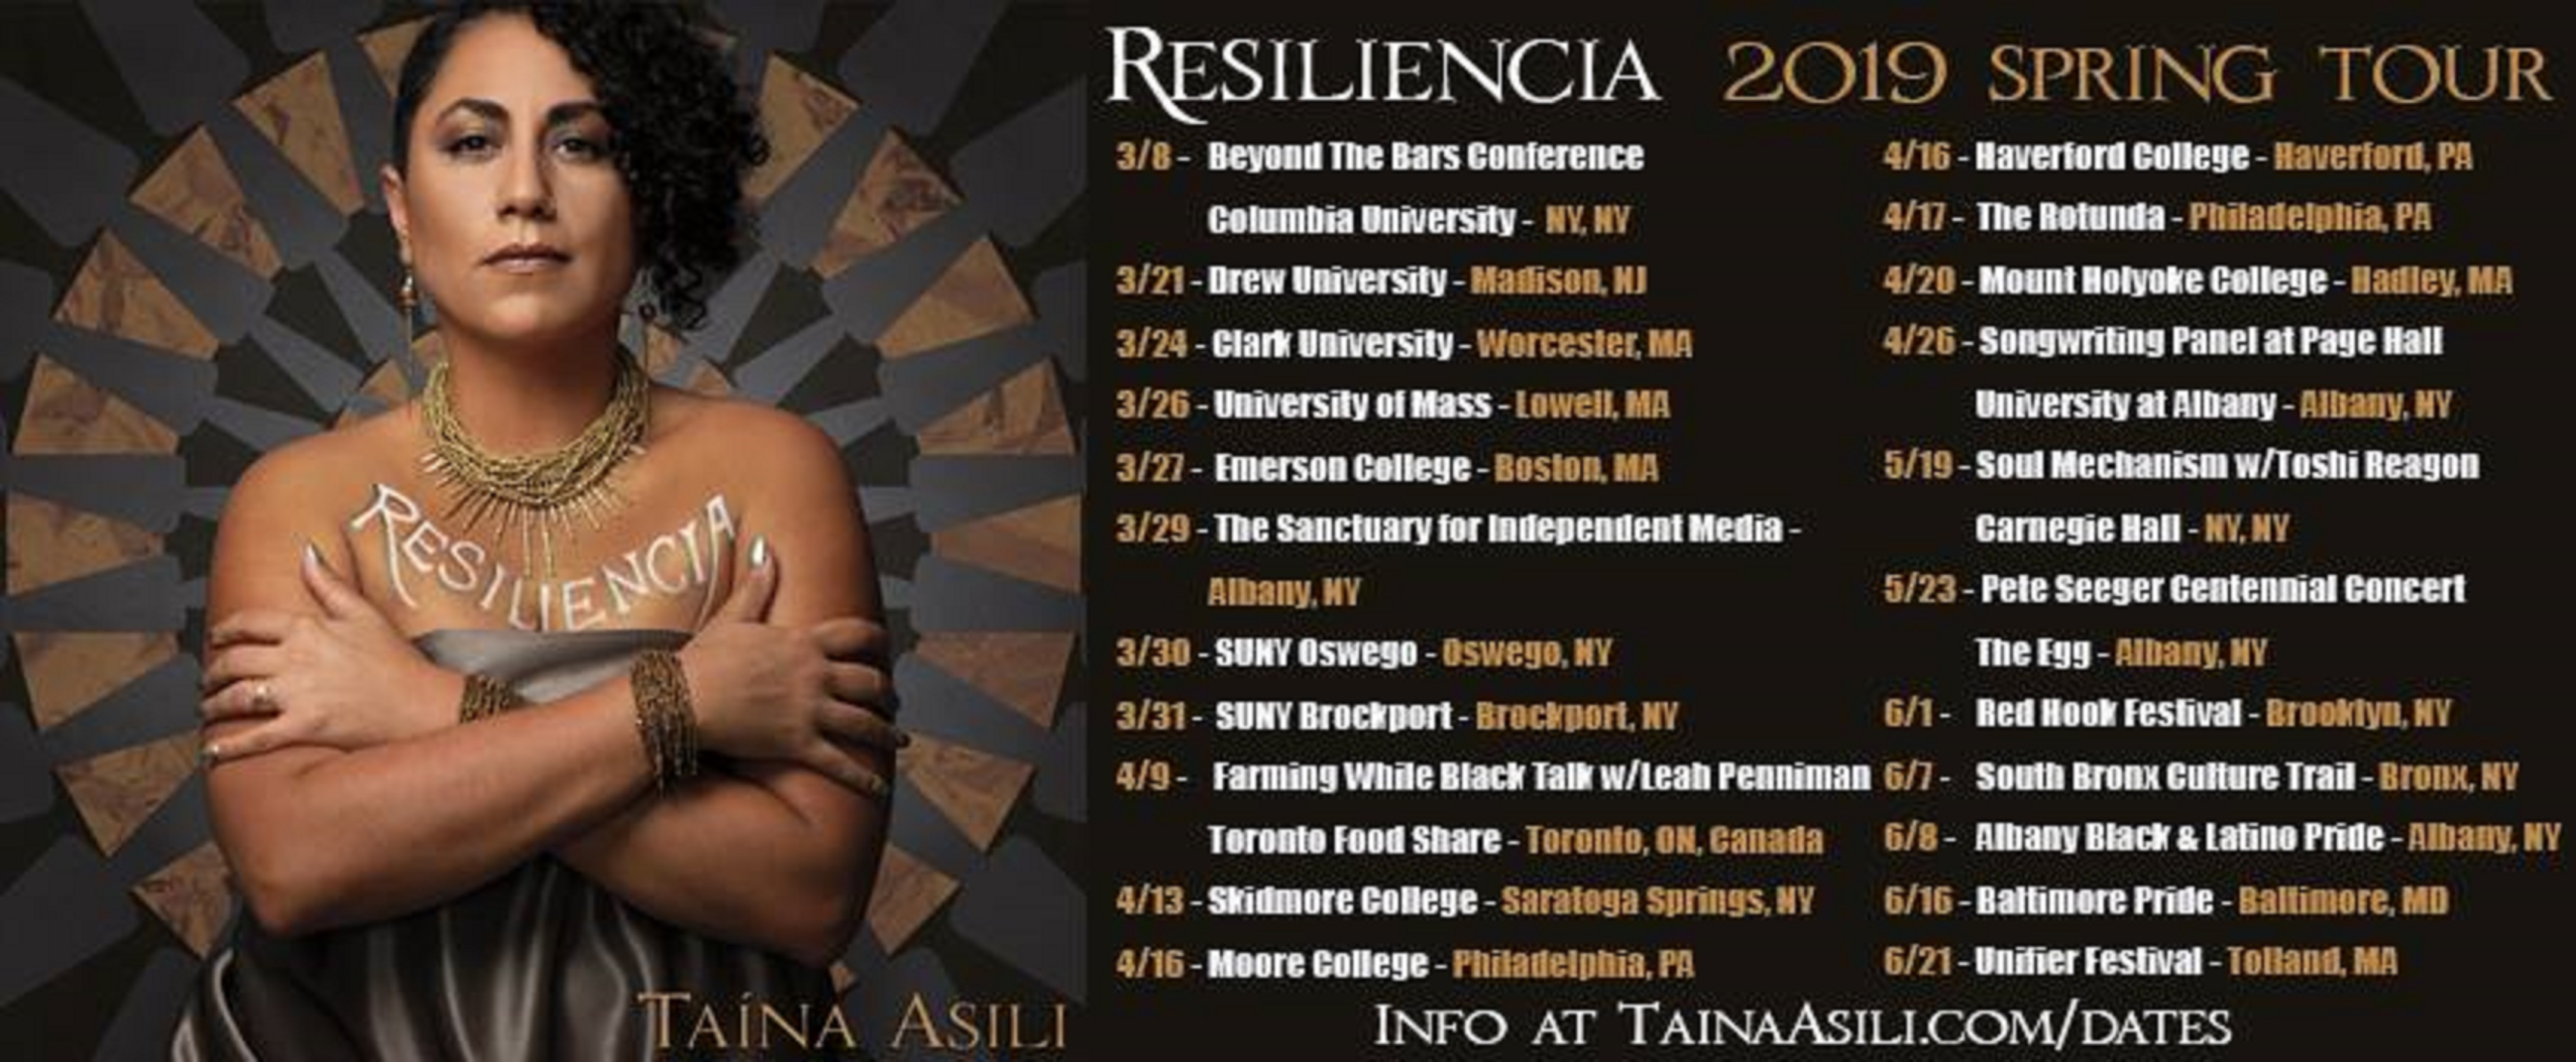 Songs of Resilience: Taína Asili at the intersection of the personal and the political